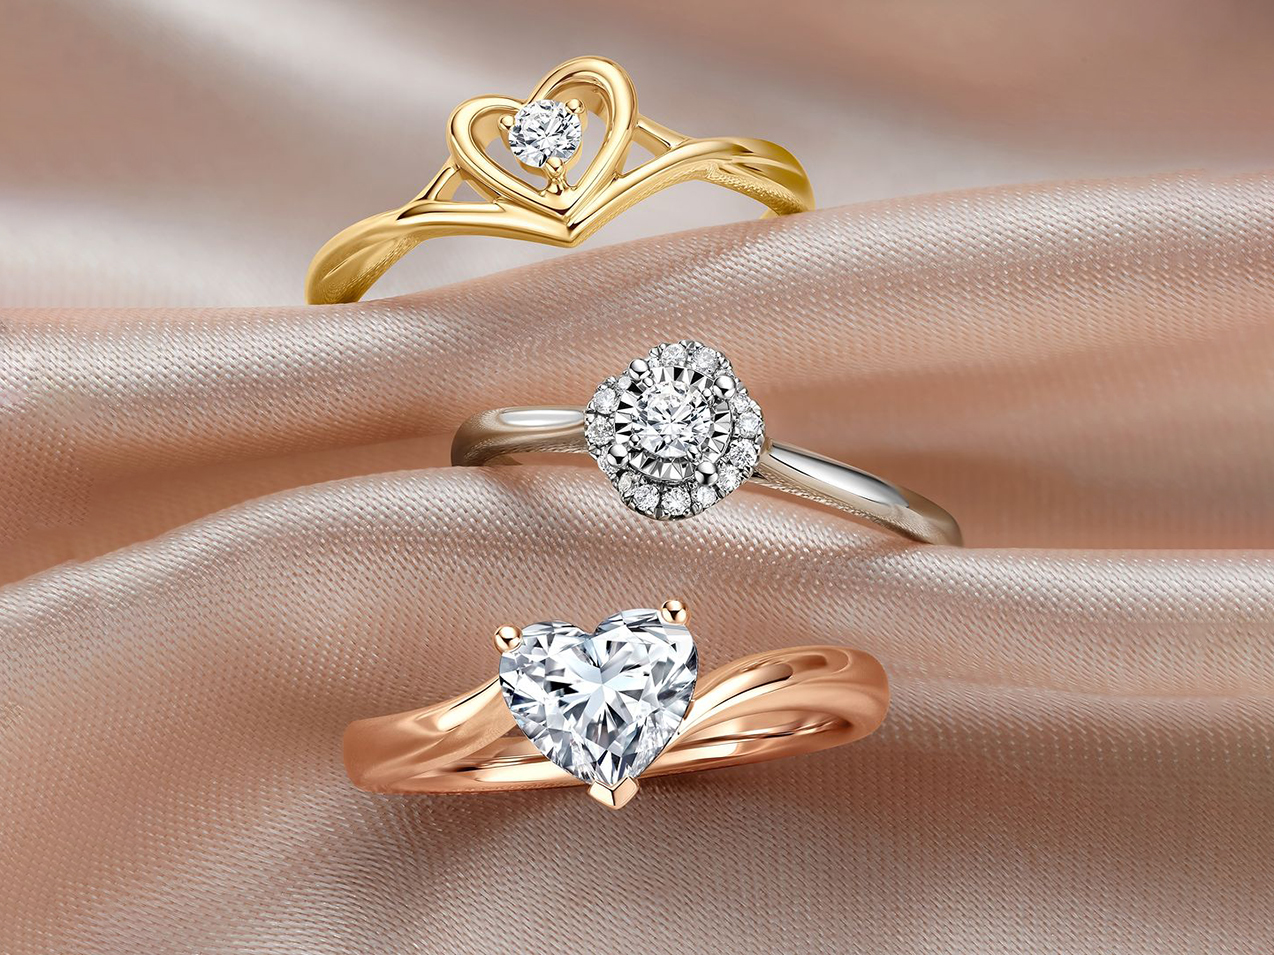 darry ring gold promise rings recommendation